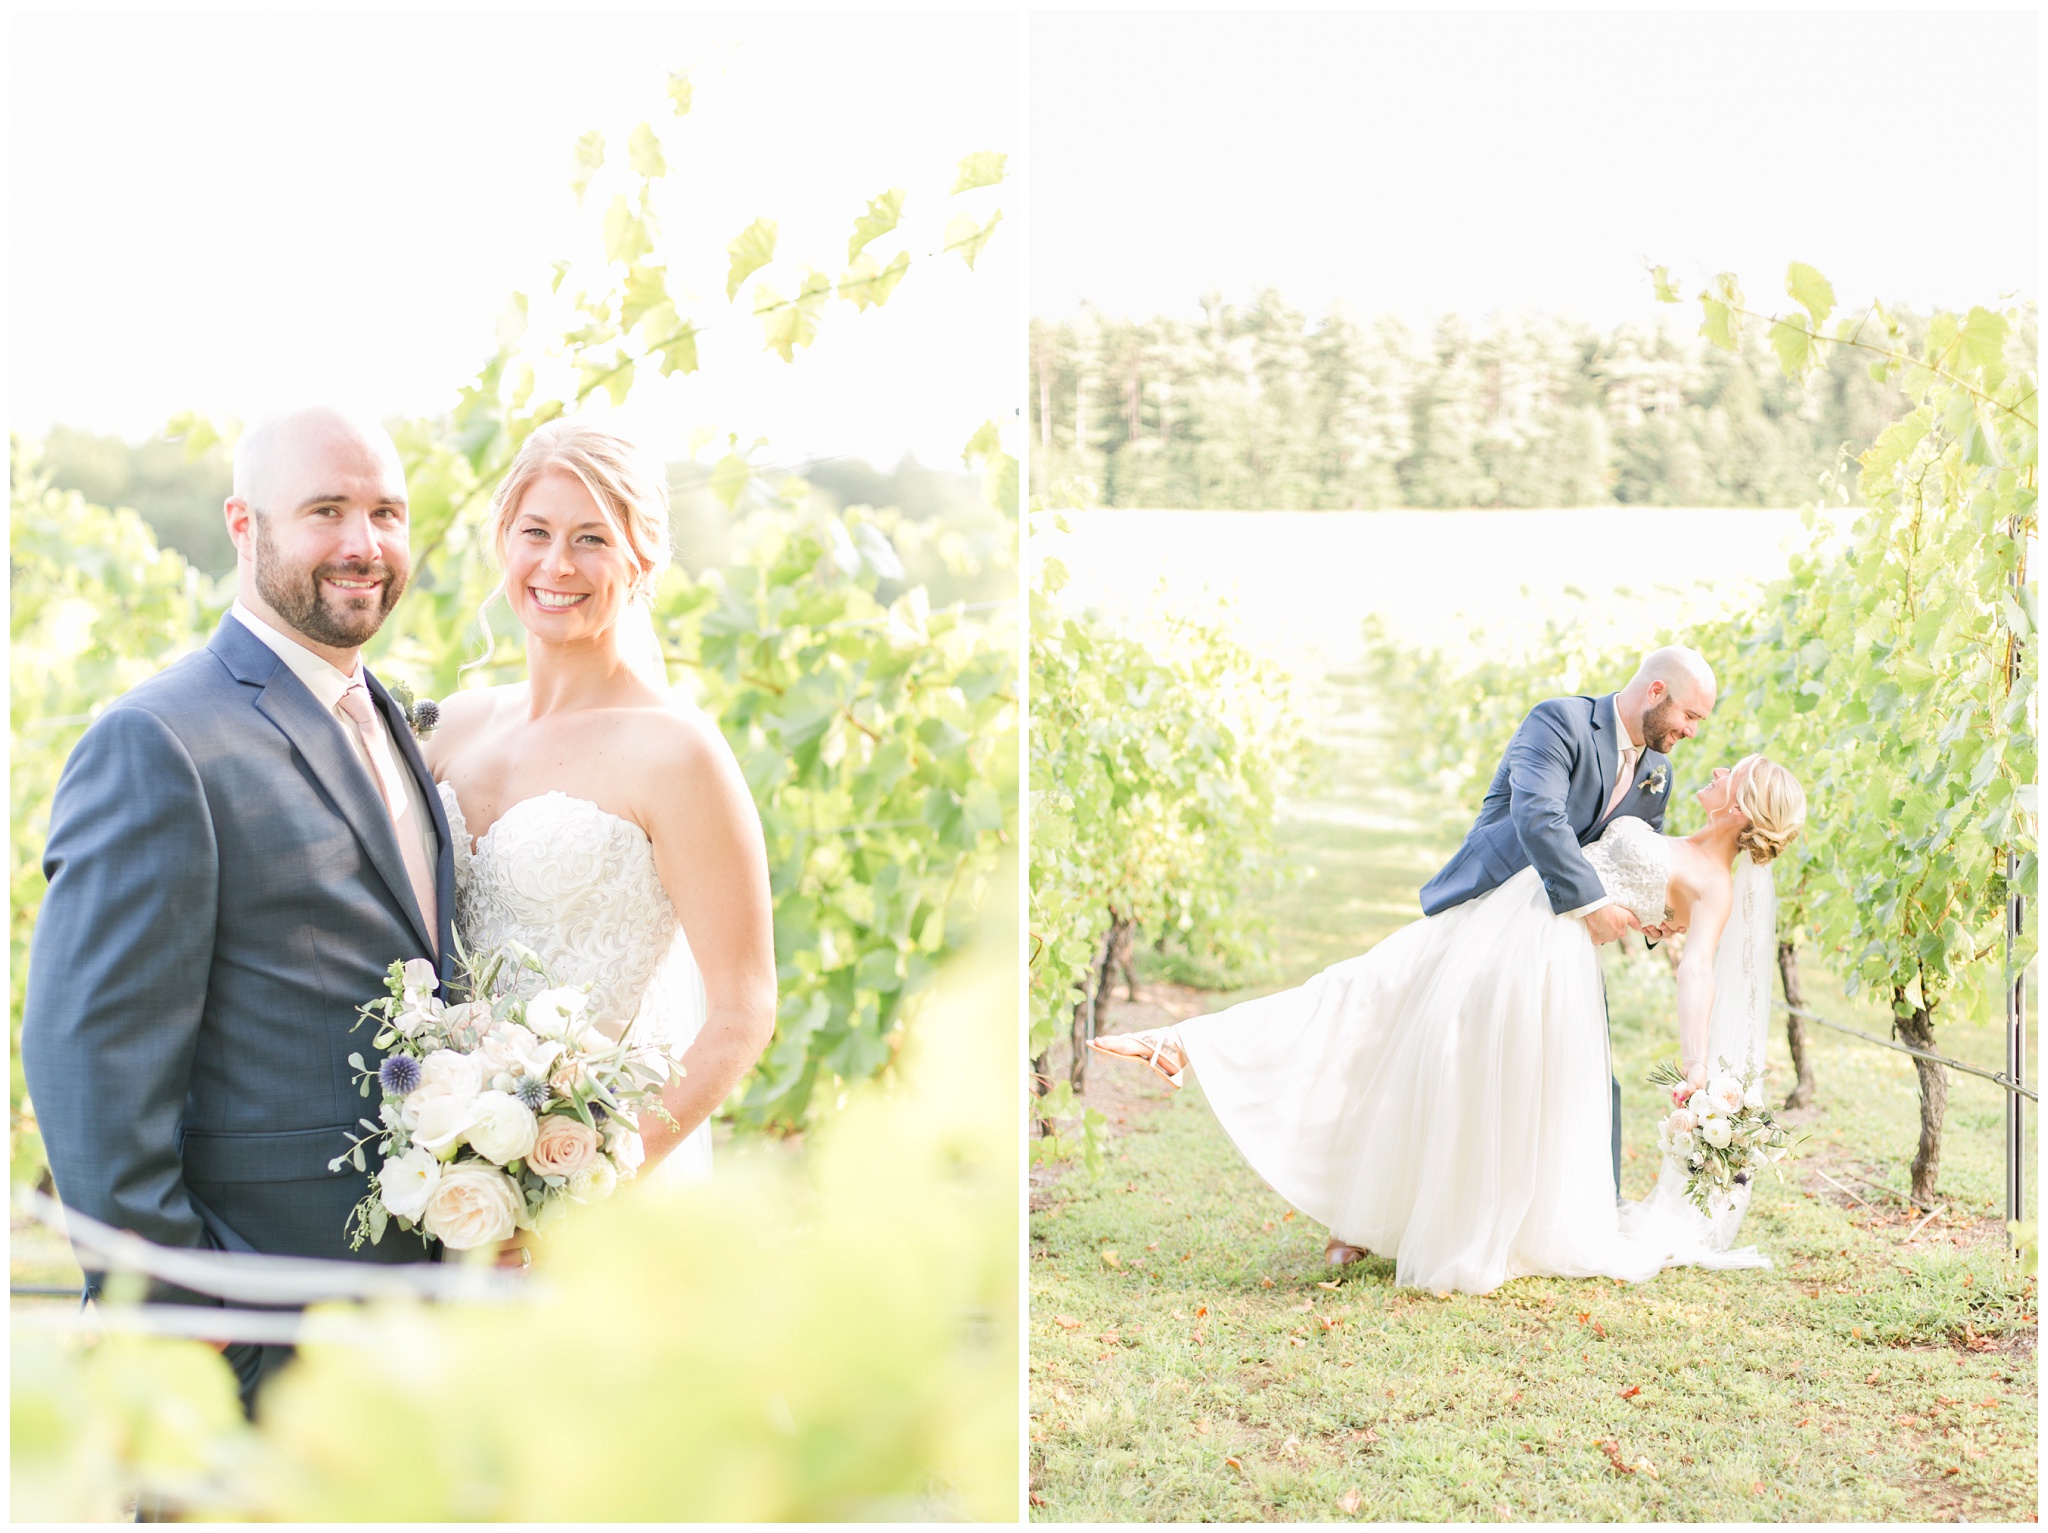 Seacoast New Hampshire Wedding Photographer | Amy Brown Photography | Flag Hill Winery Outdoor NH Wedding 